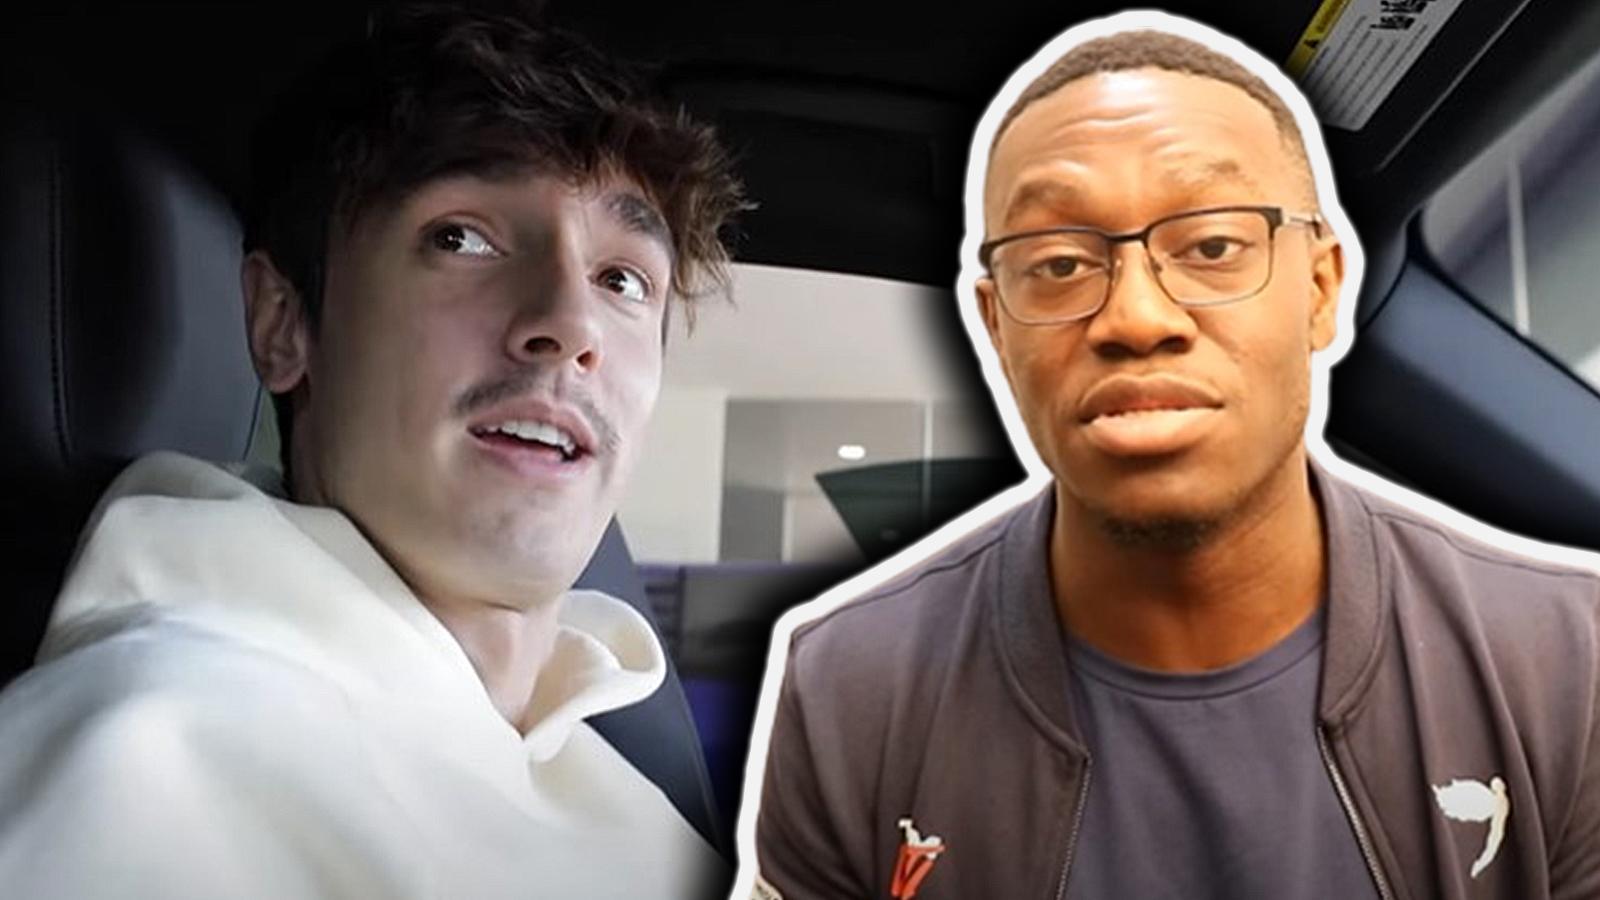 Bryce Hall says Deji is his next influencer boxing opponent